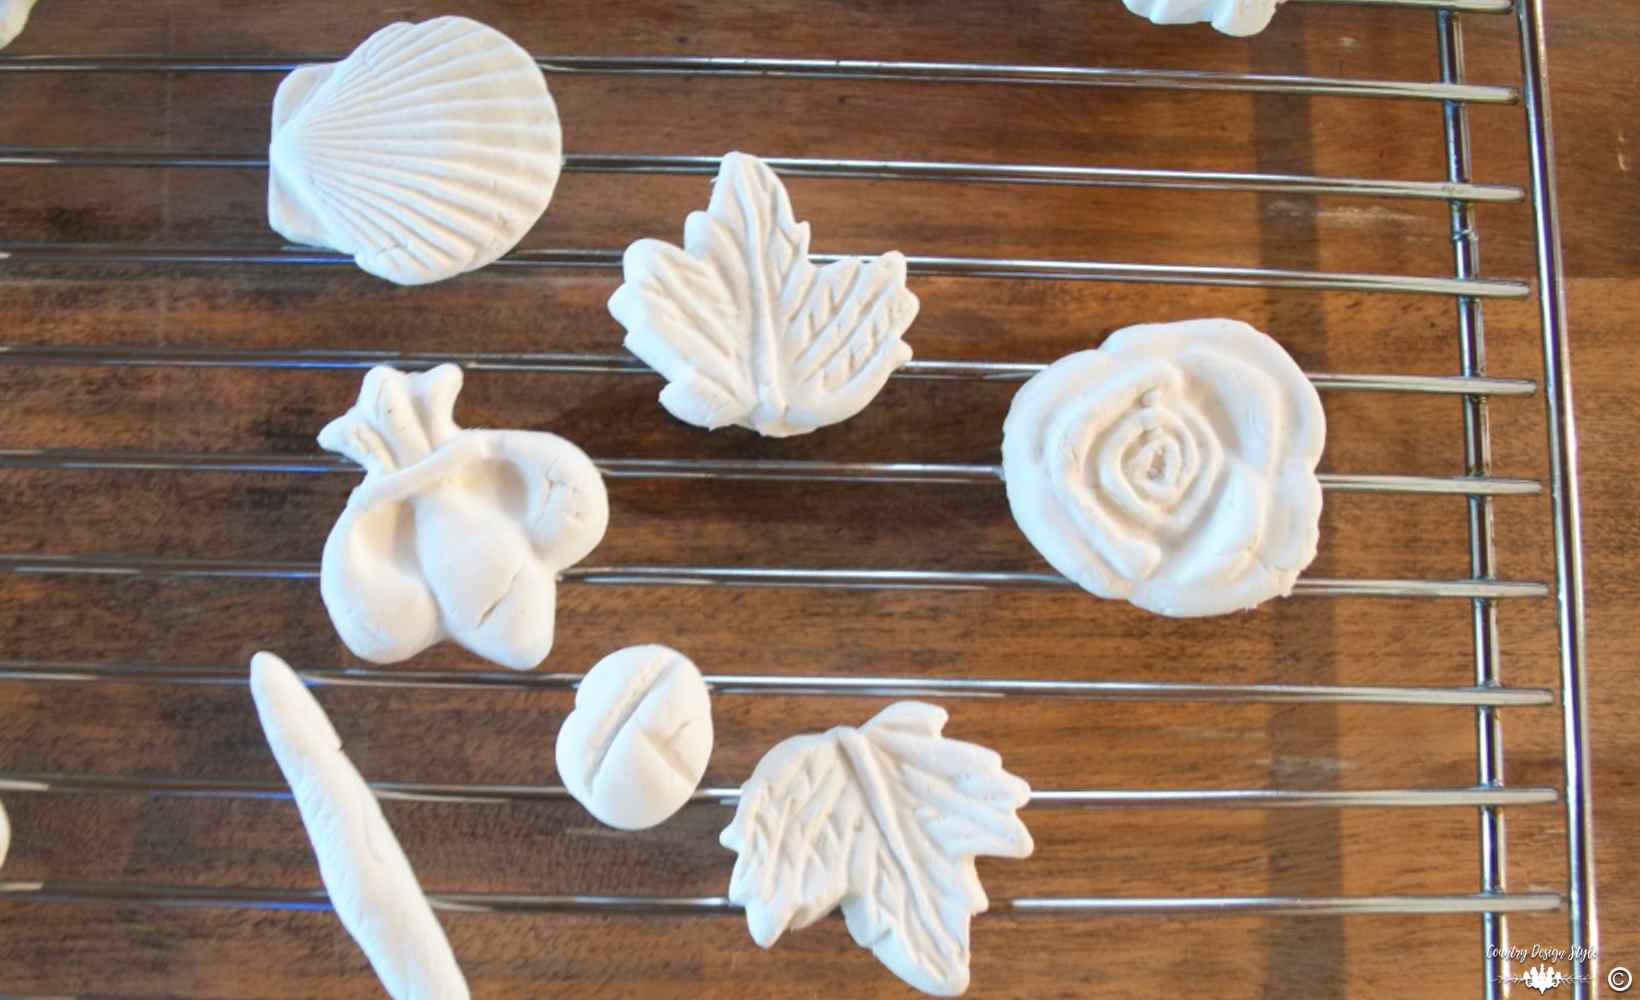 Making clay potpourri shapes | Country Design Style | countrydesignstyle.com